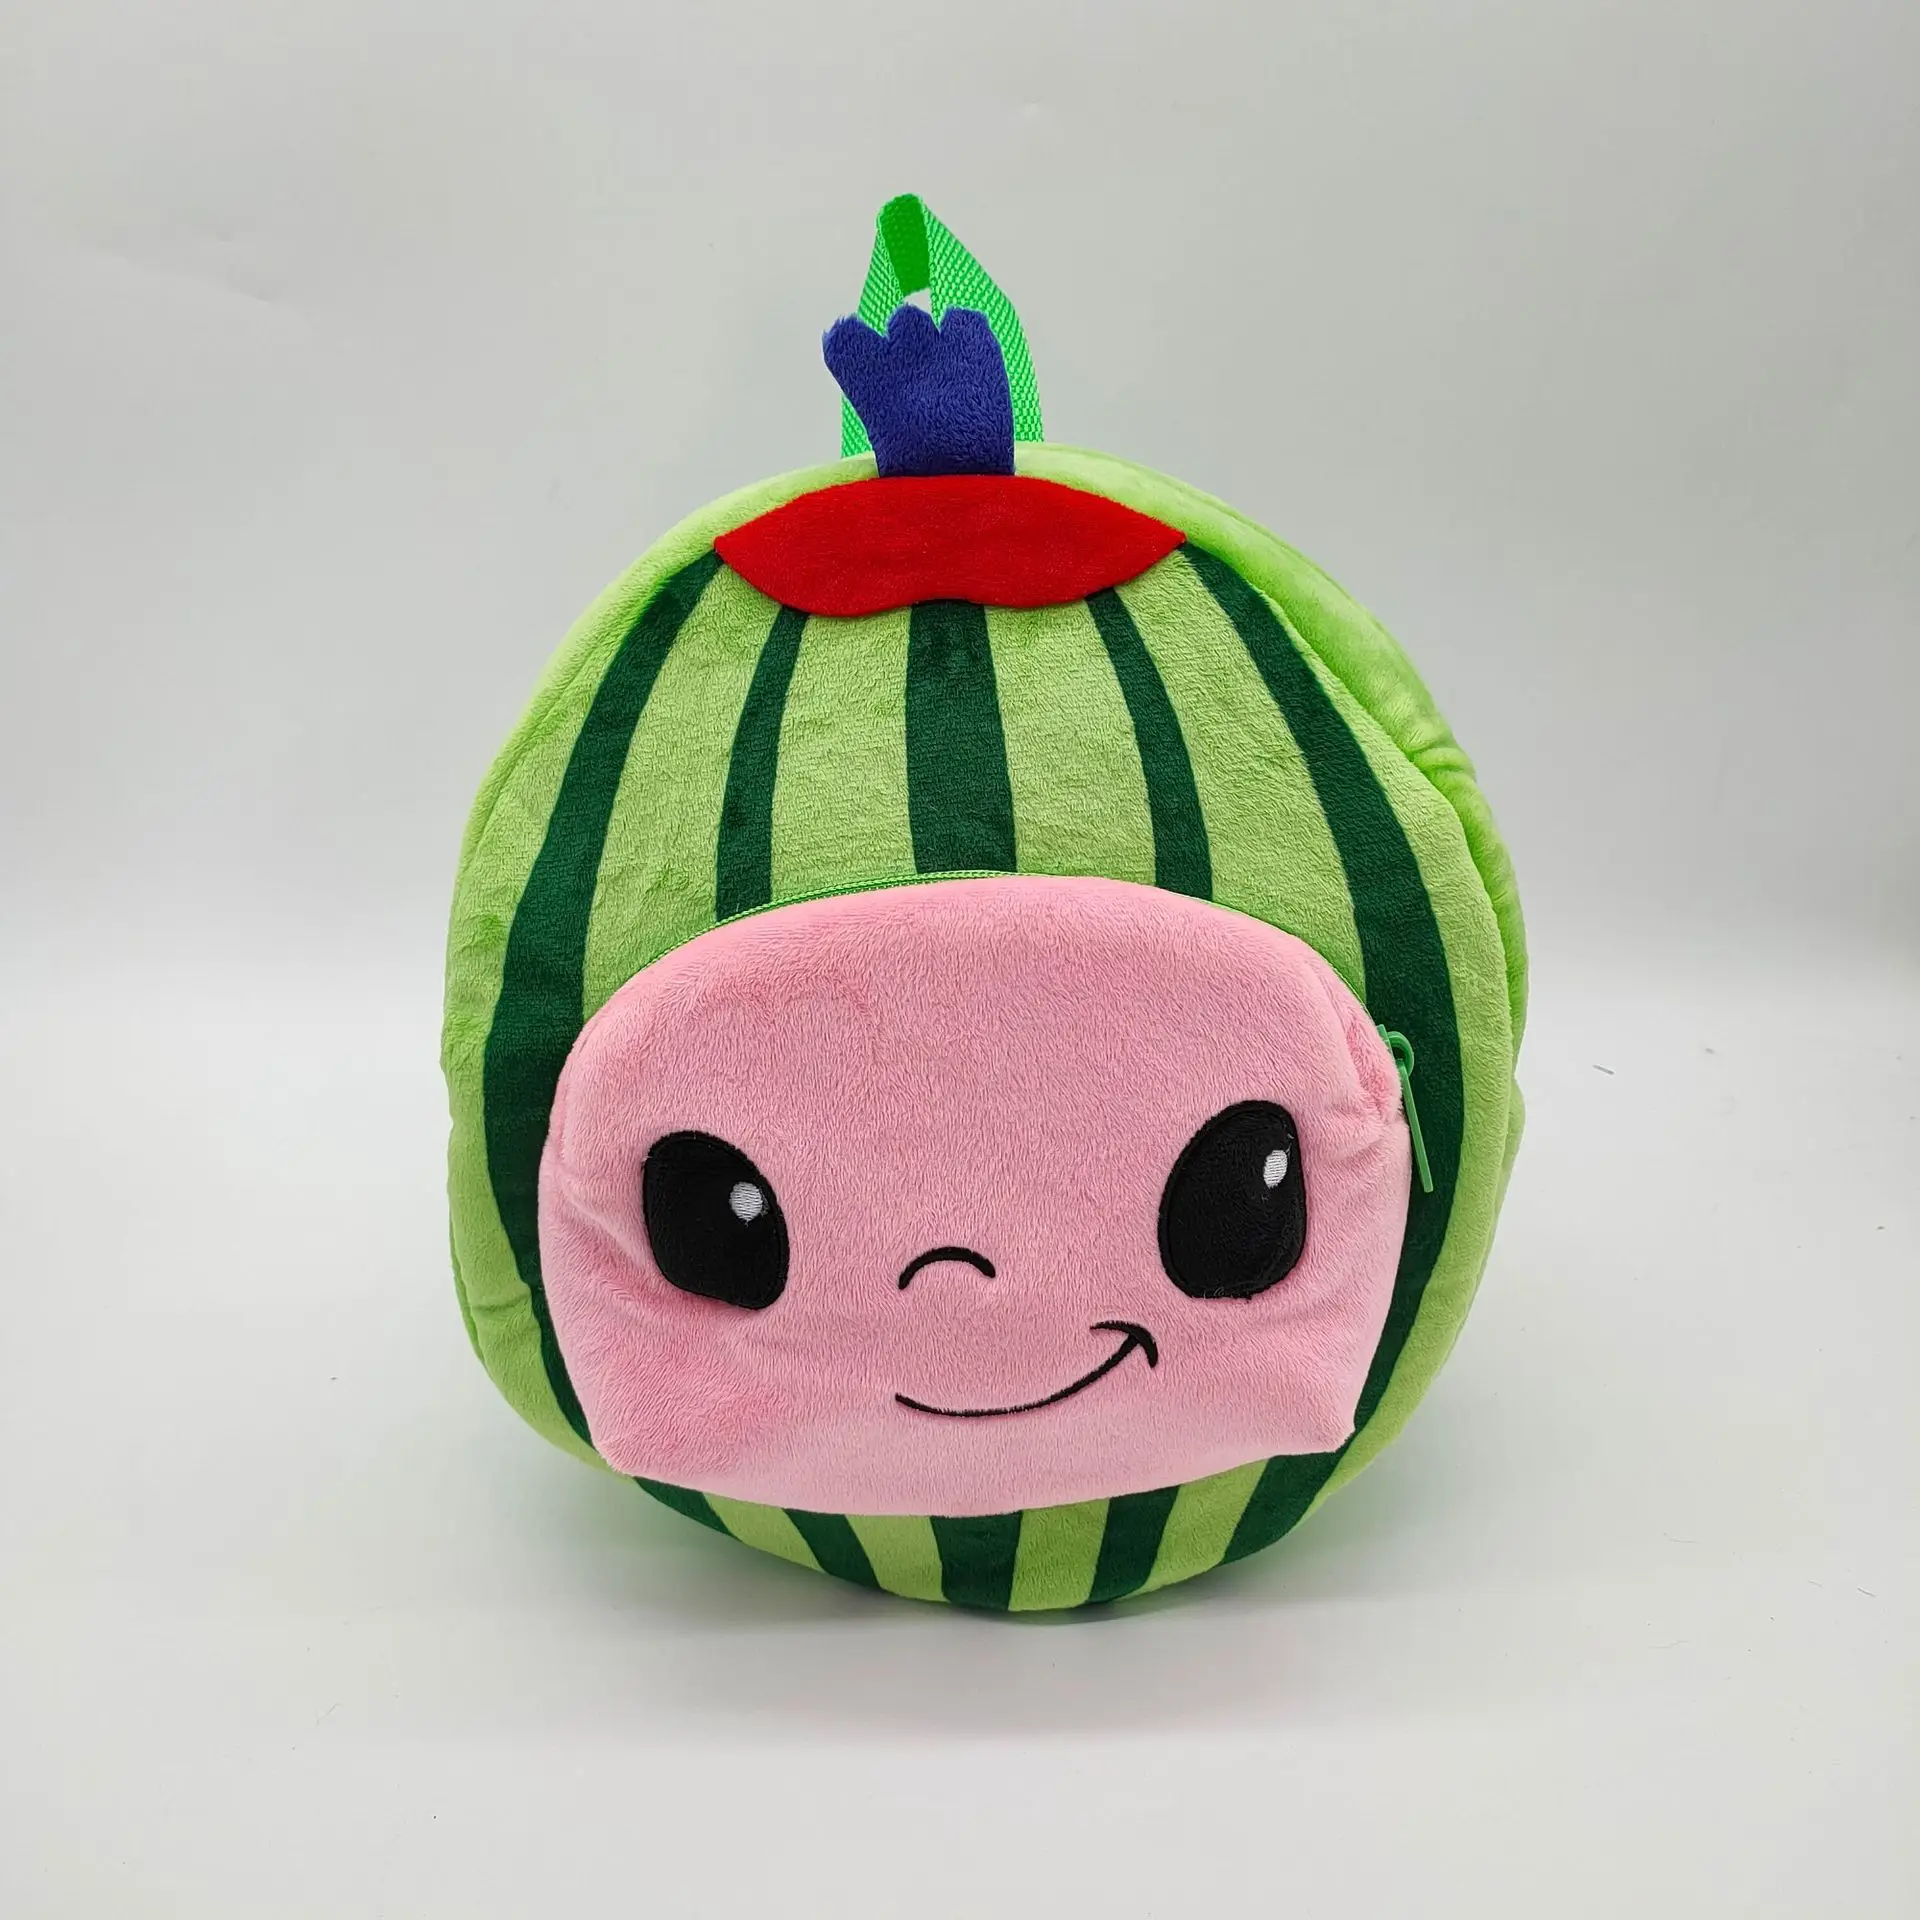 New watermelon shoulder plush backpack, birthday gifts for men and women, Christmas gifts, children's school backpacks, books, s